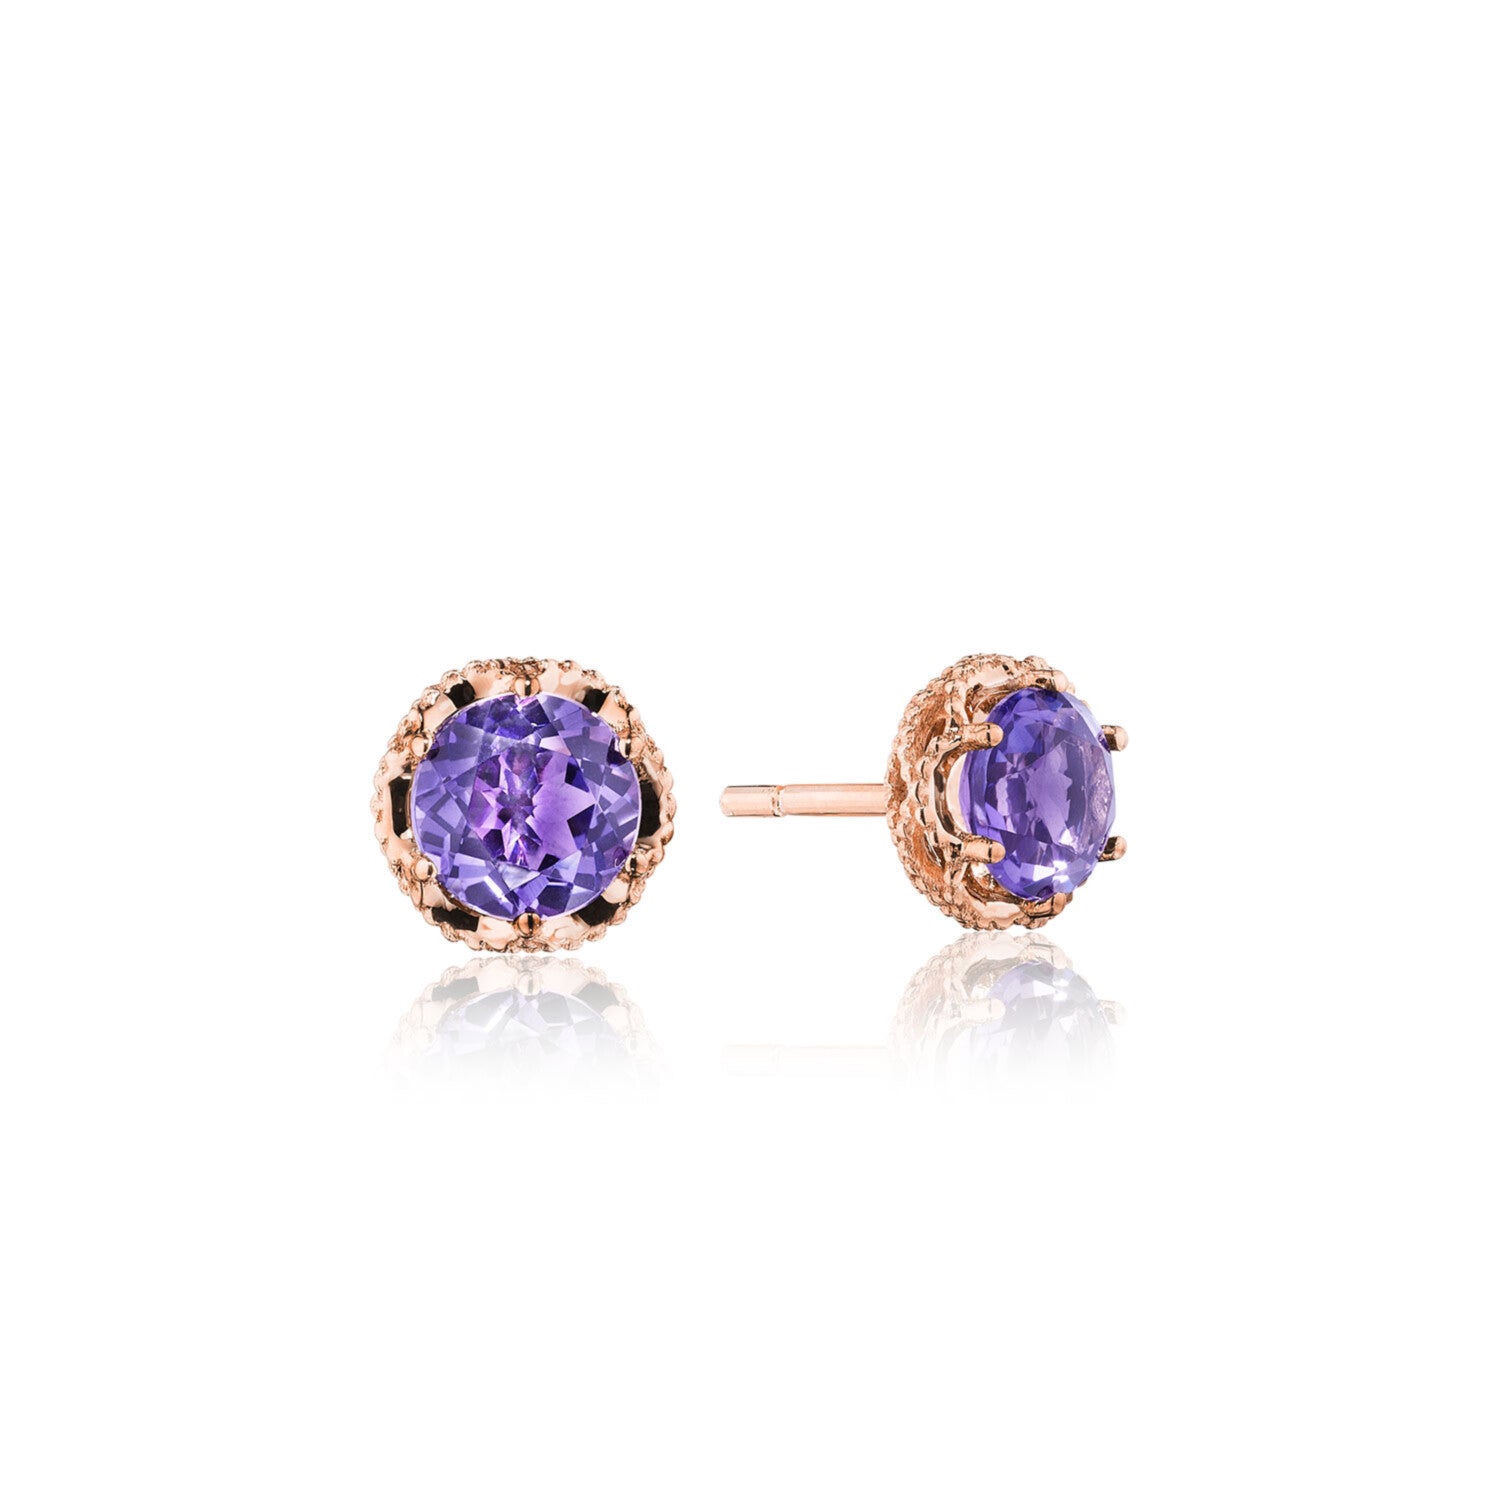 Tacori Petite Crescent Crown Studs featuring Amethyst and Rose Gold